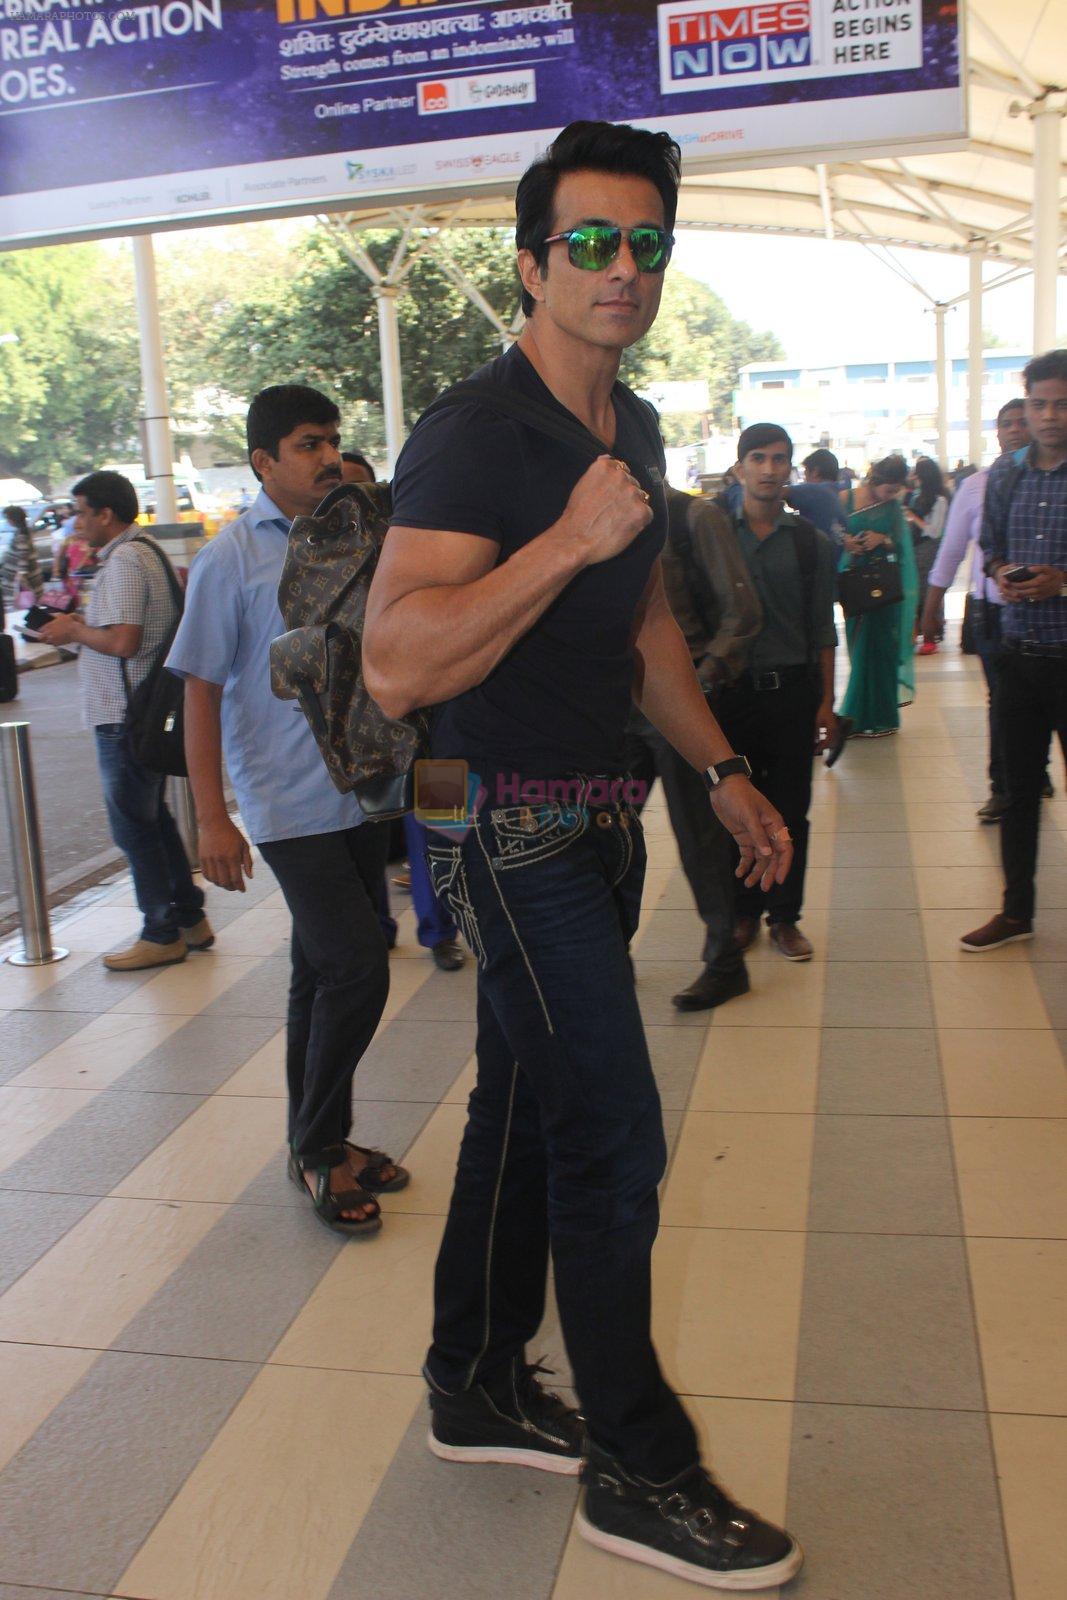 Sonu Sood snapped at airport on 22nd Jan 2016